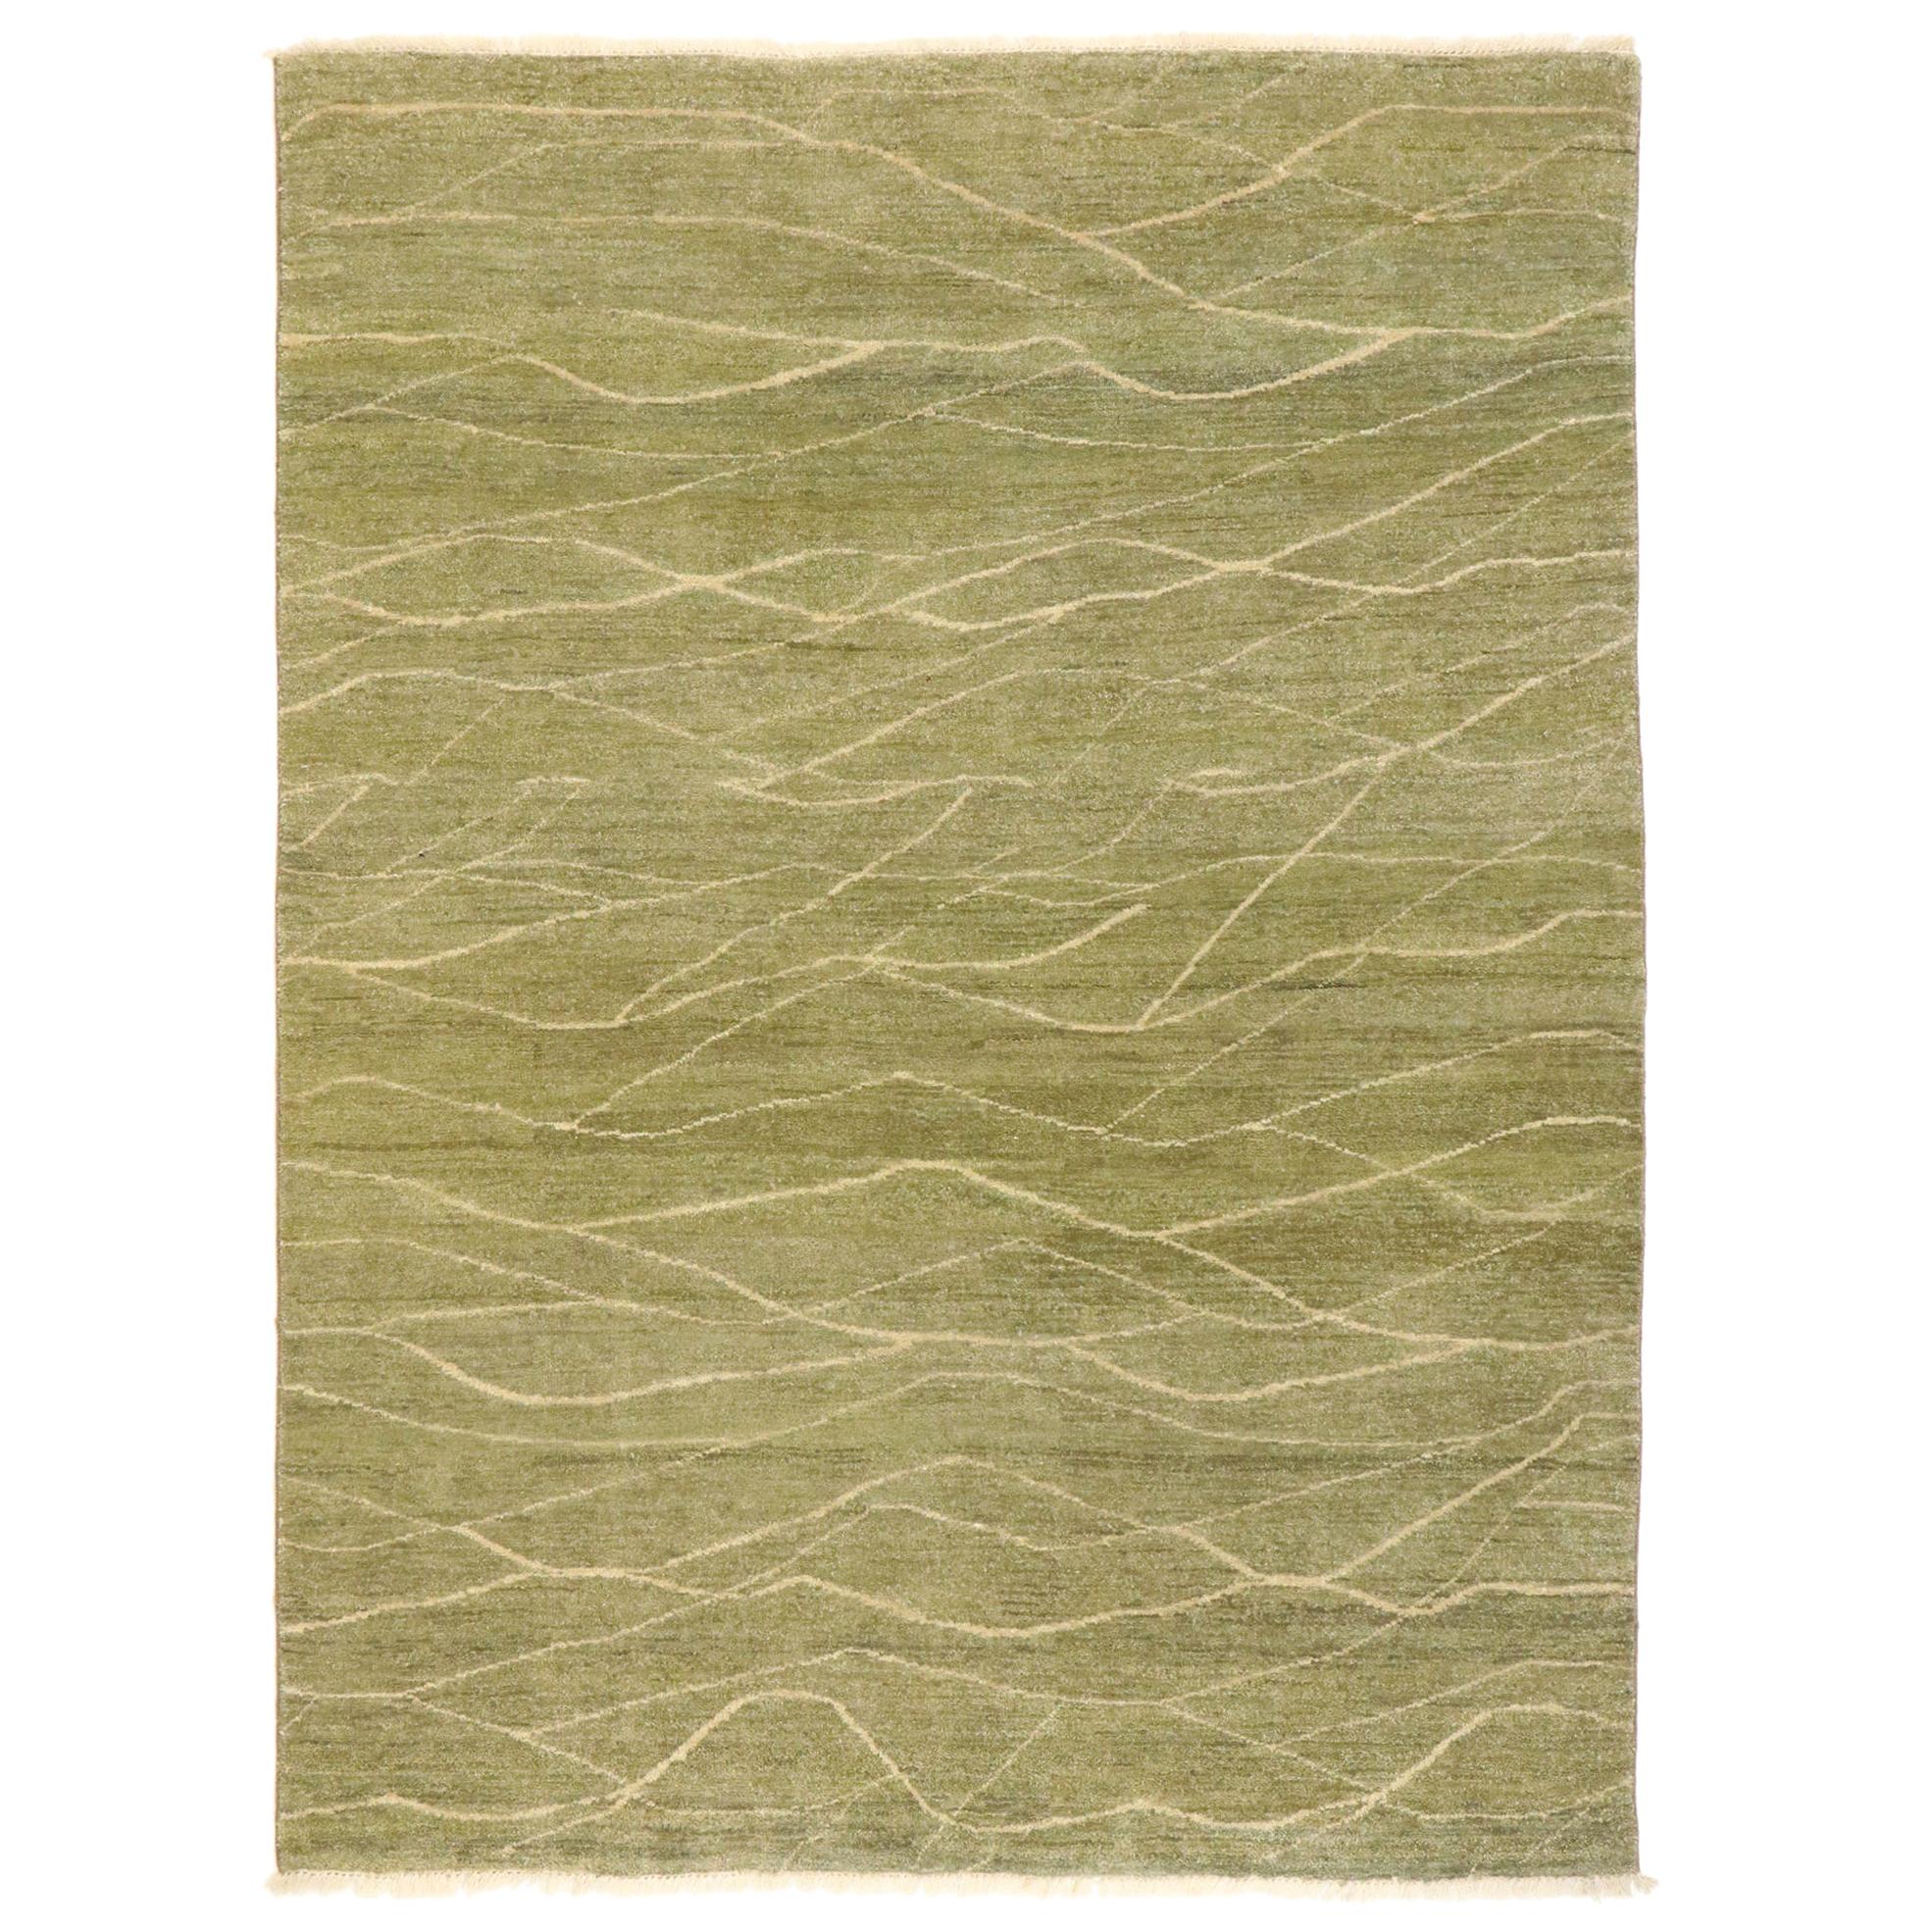 New Transitional Accent Rug with Metamorphic Organic Modern Style For Sale